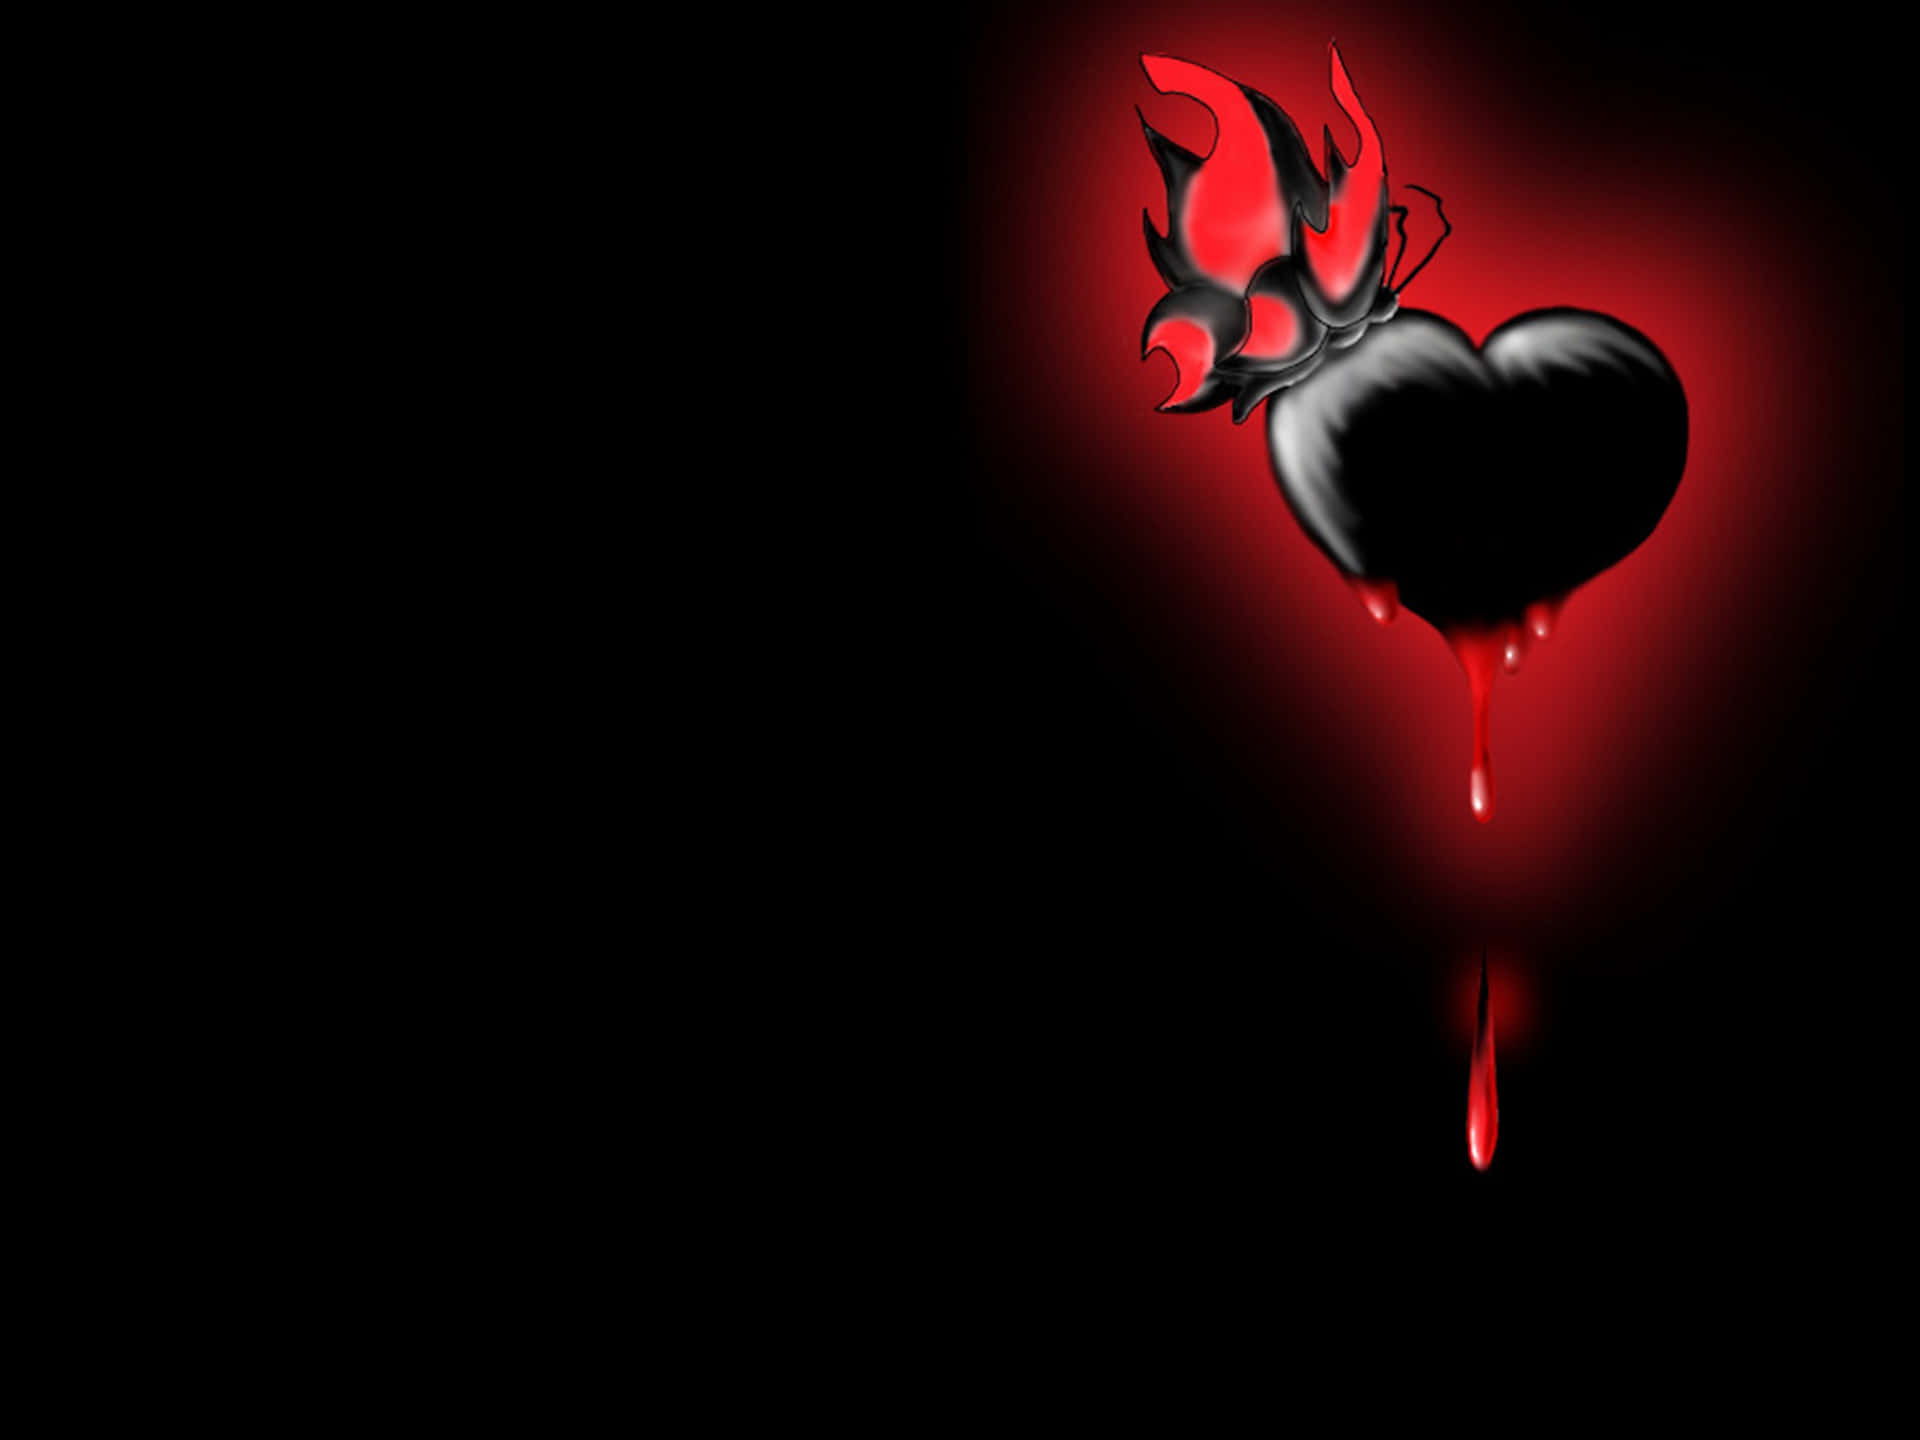 Experience the beauty of love with our Black Heart wallpaper